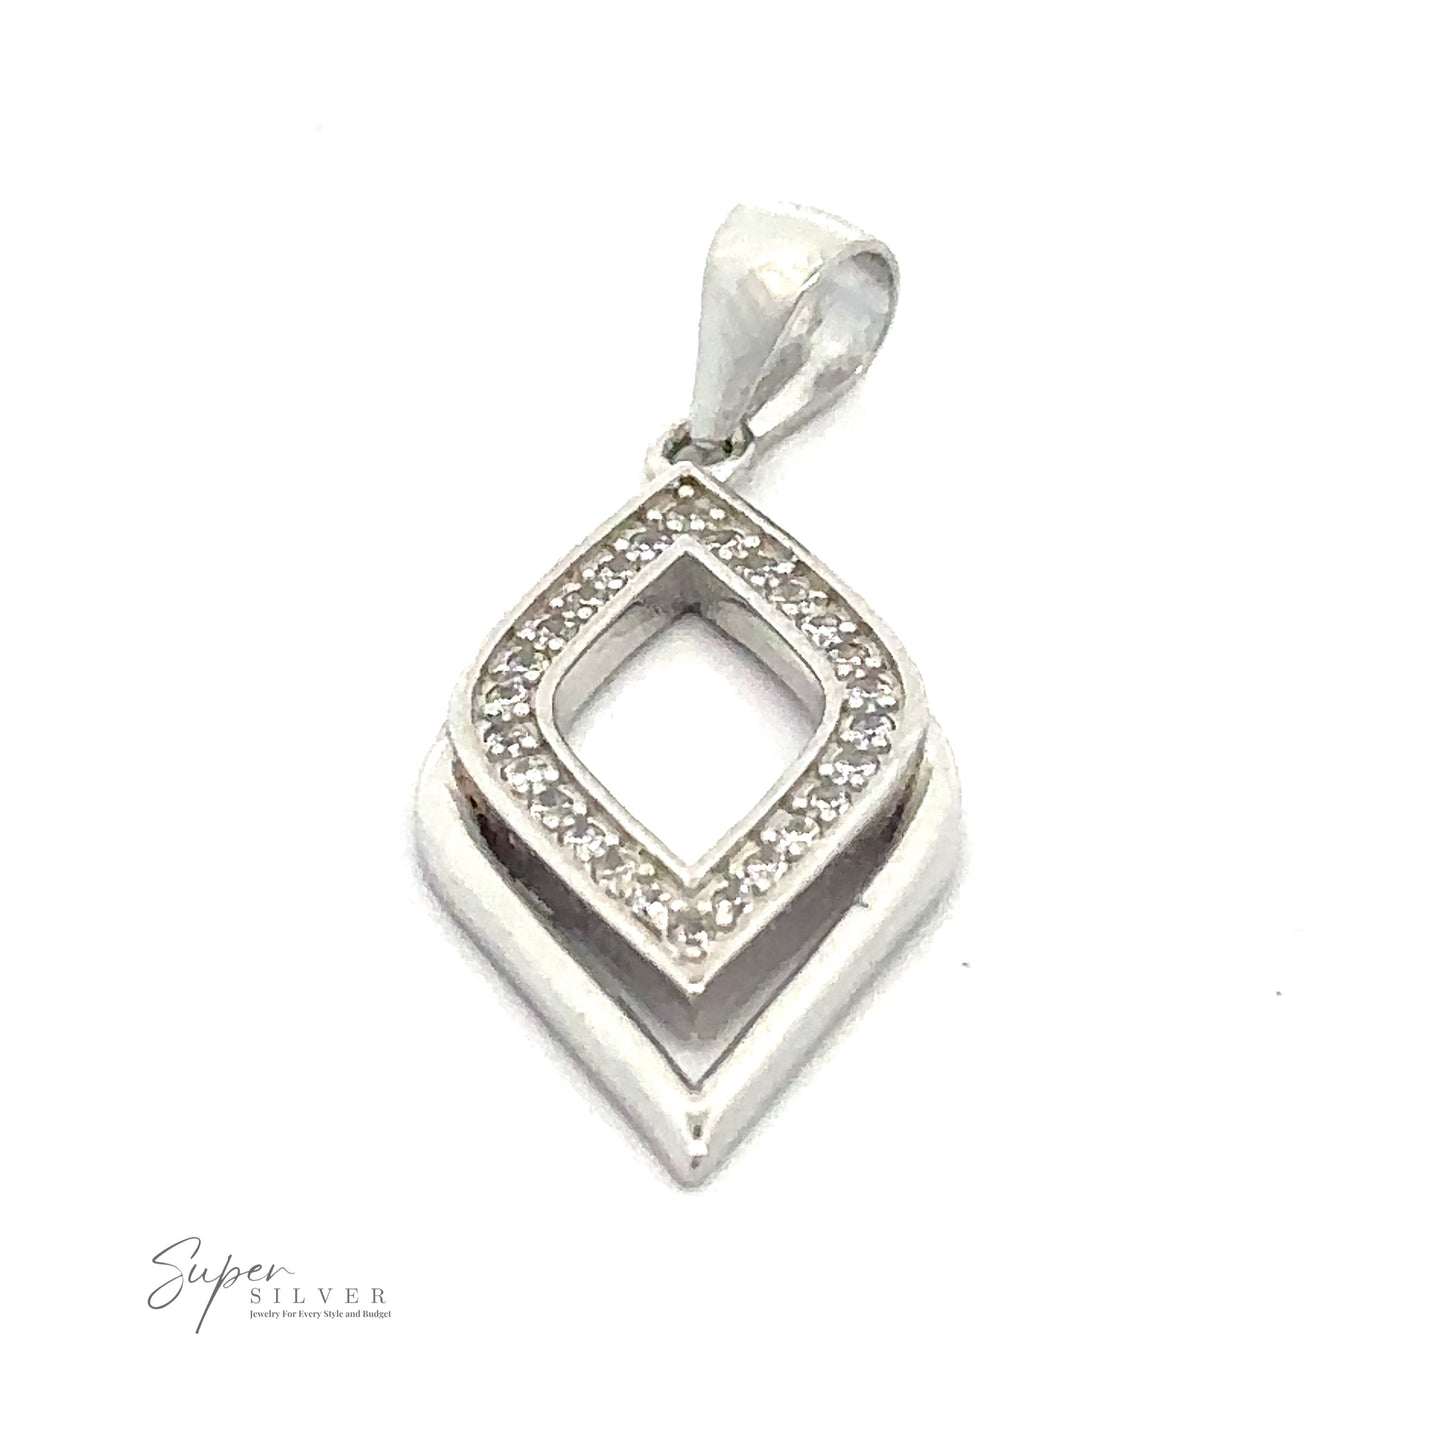 
                  
                    A Cubic Zirconia Leaf Shape Pendant shaped like two nested diamonds, with the inner diamond encrusted with cubic zirconia stones. The top diamond is open in the center. The brand name "Super Silver" is written at the bottom left.
                  
                